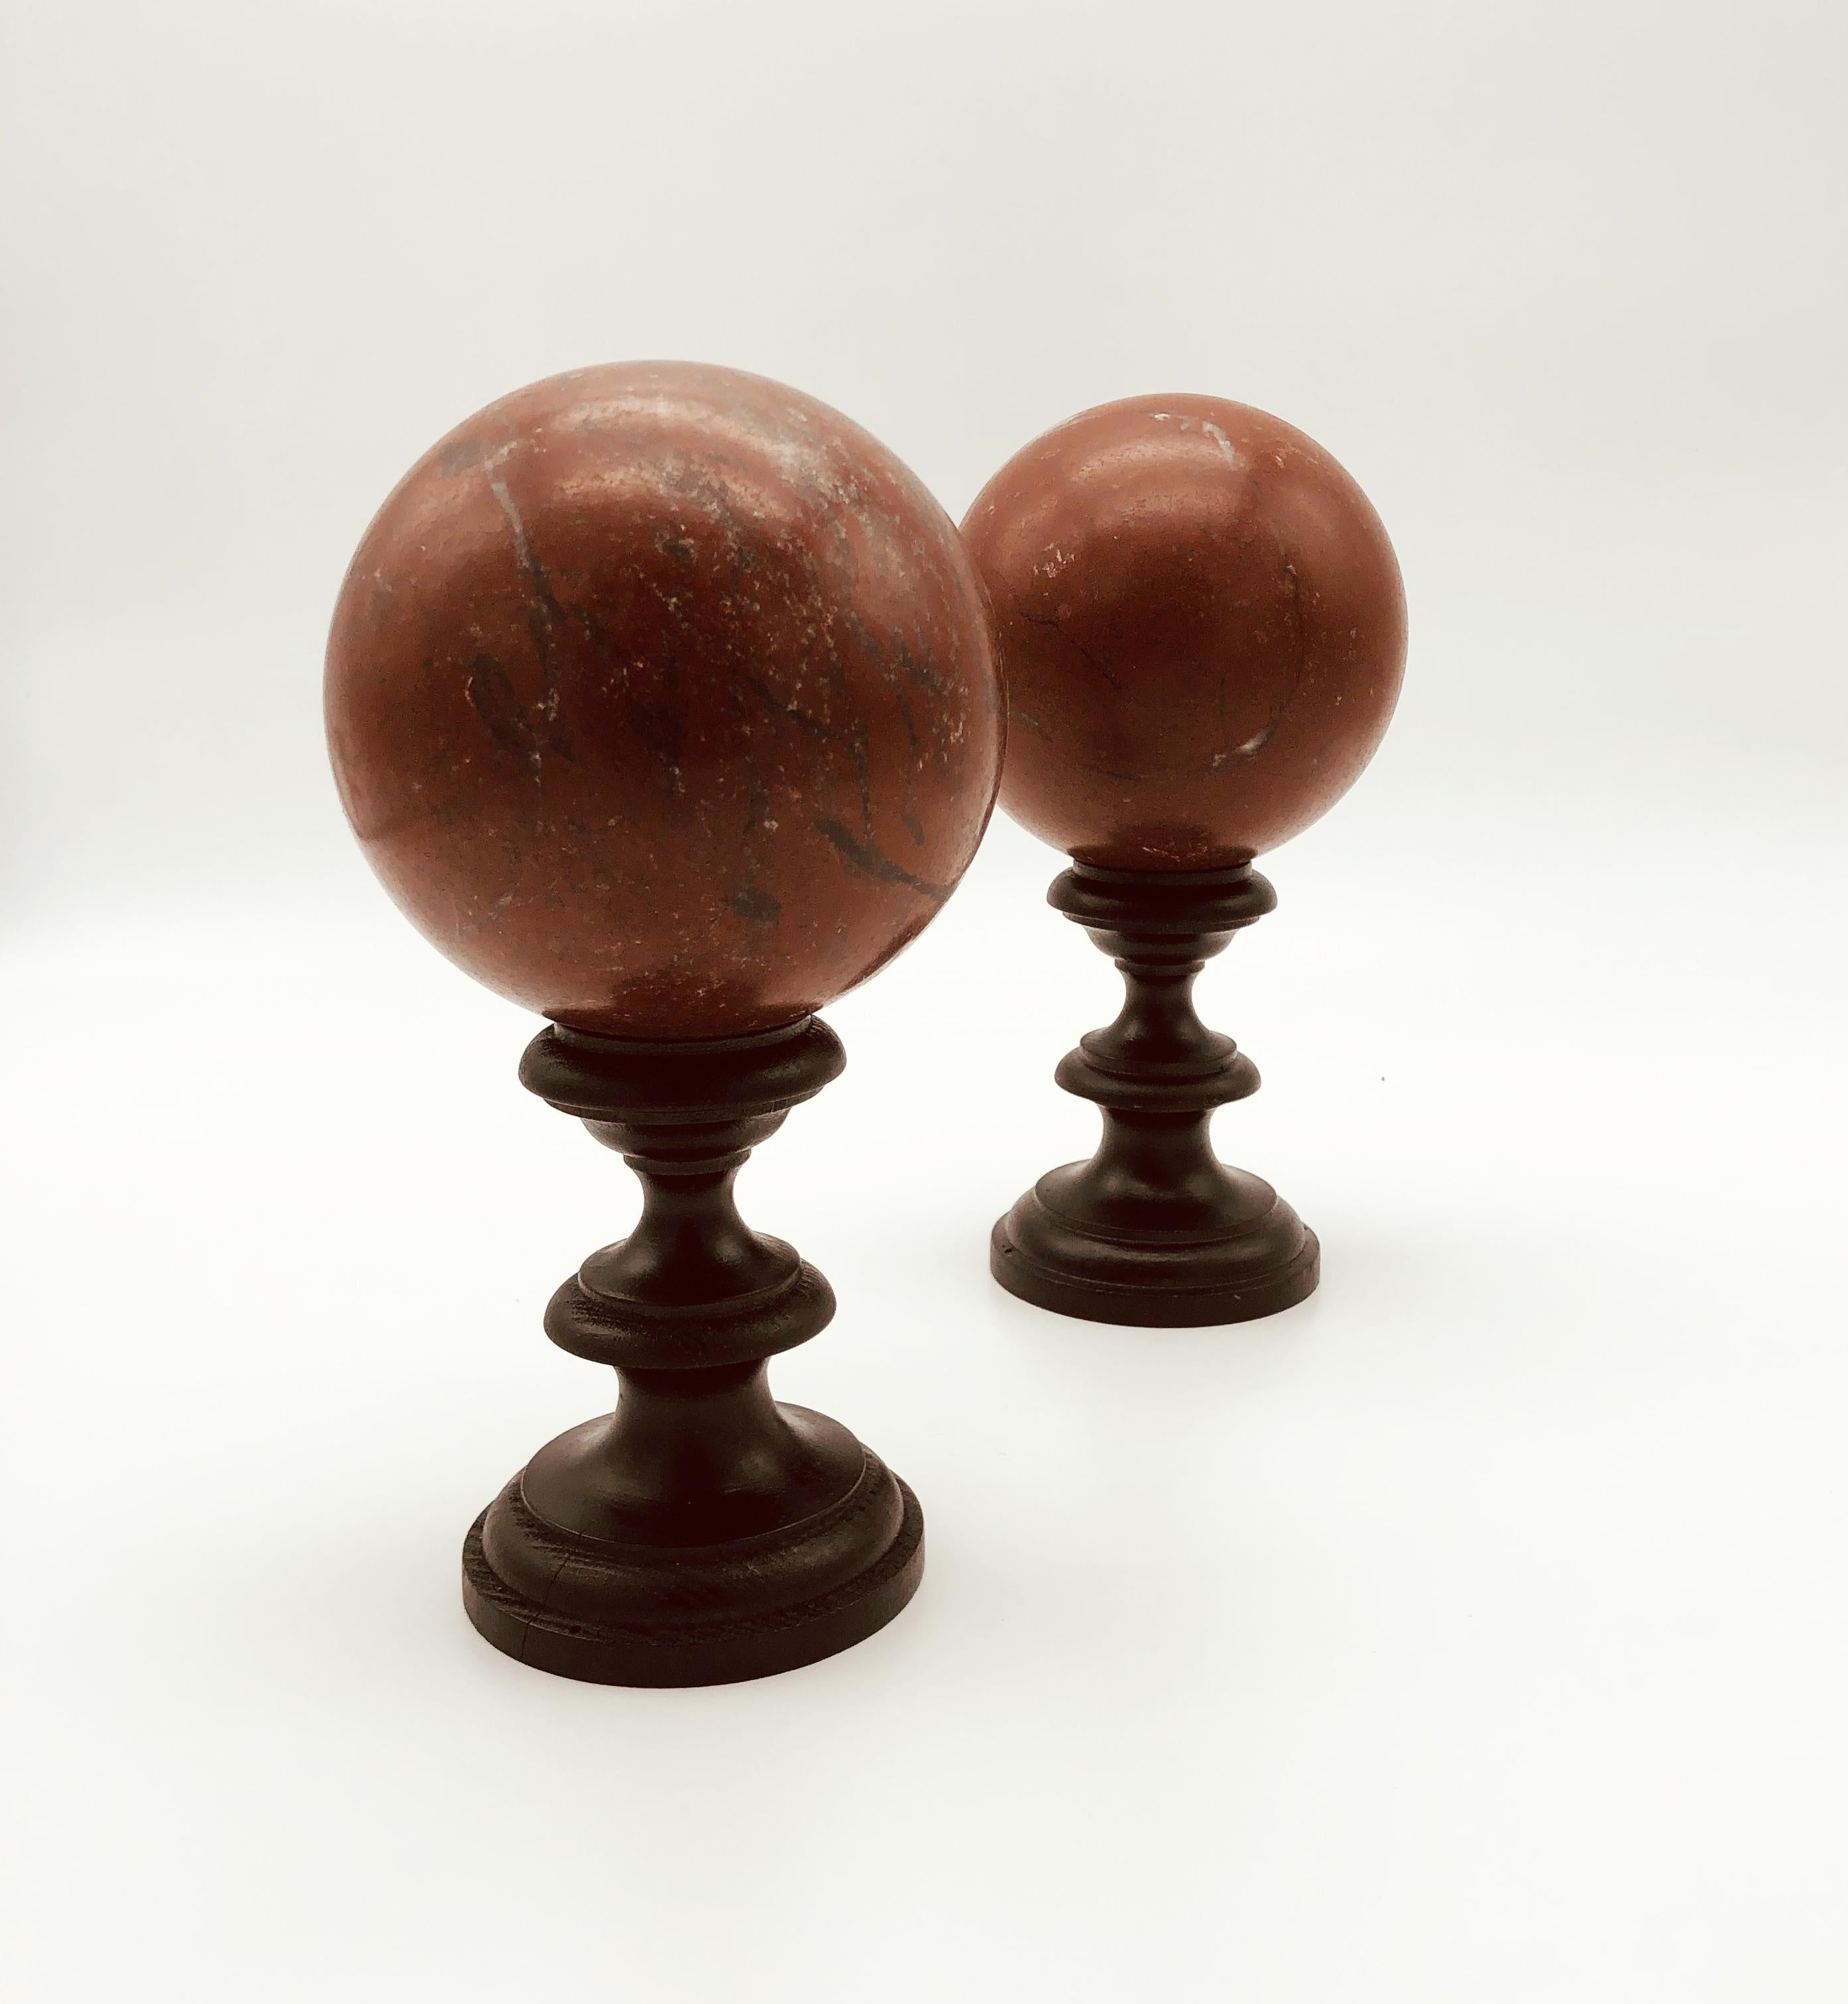 20th Century Italian Pair of Red Griotte Marble Sculpture Grand Tour Balls 6